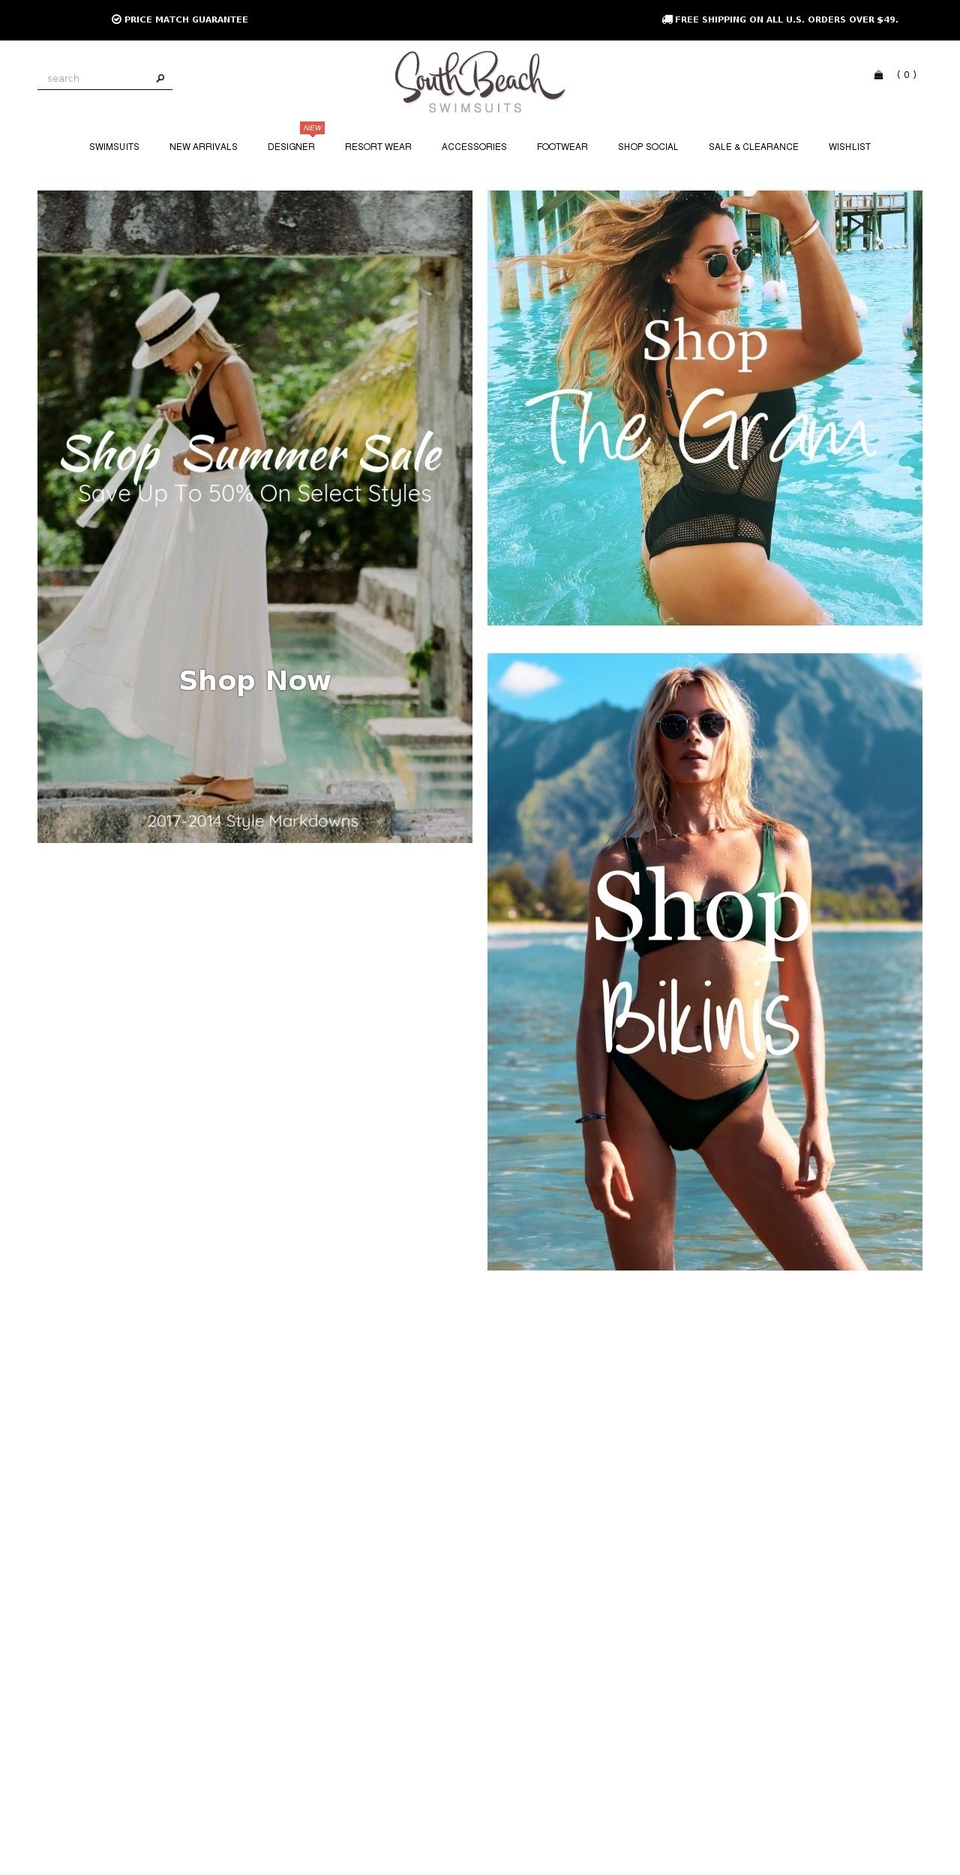 Made With ❤ By Minion Made - Updated Checkout Shopify theme site example swimwearboutique.net